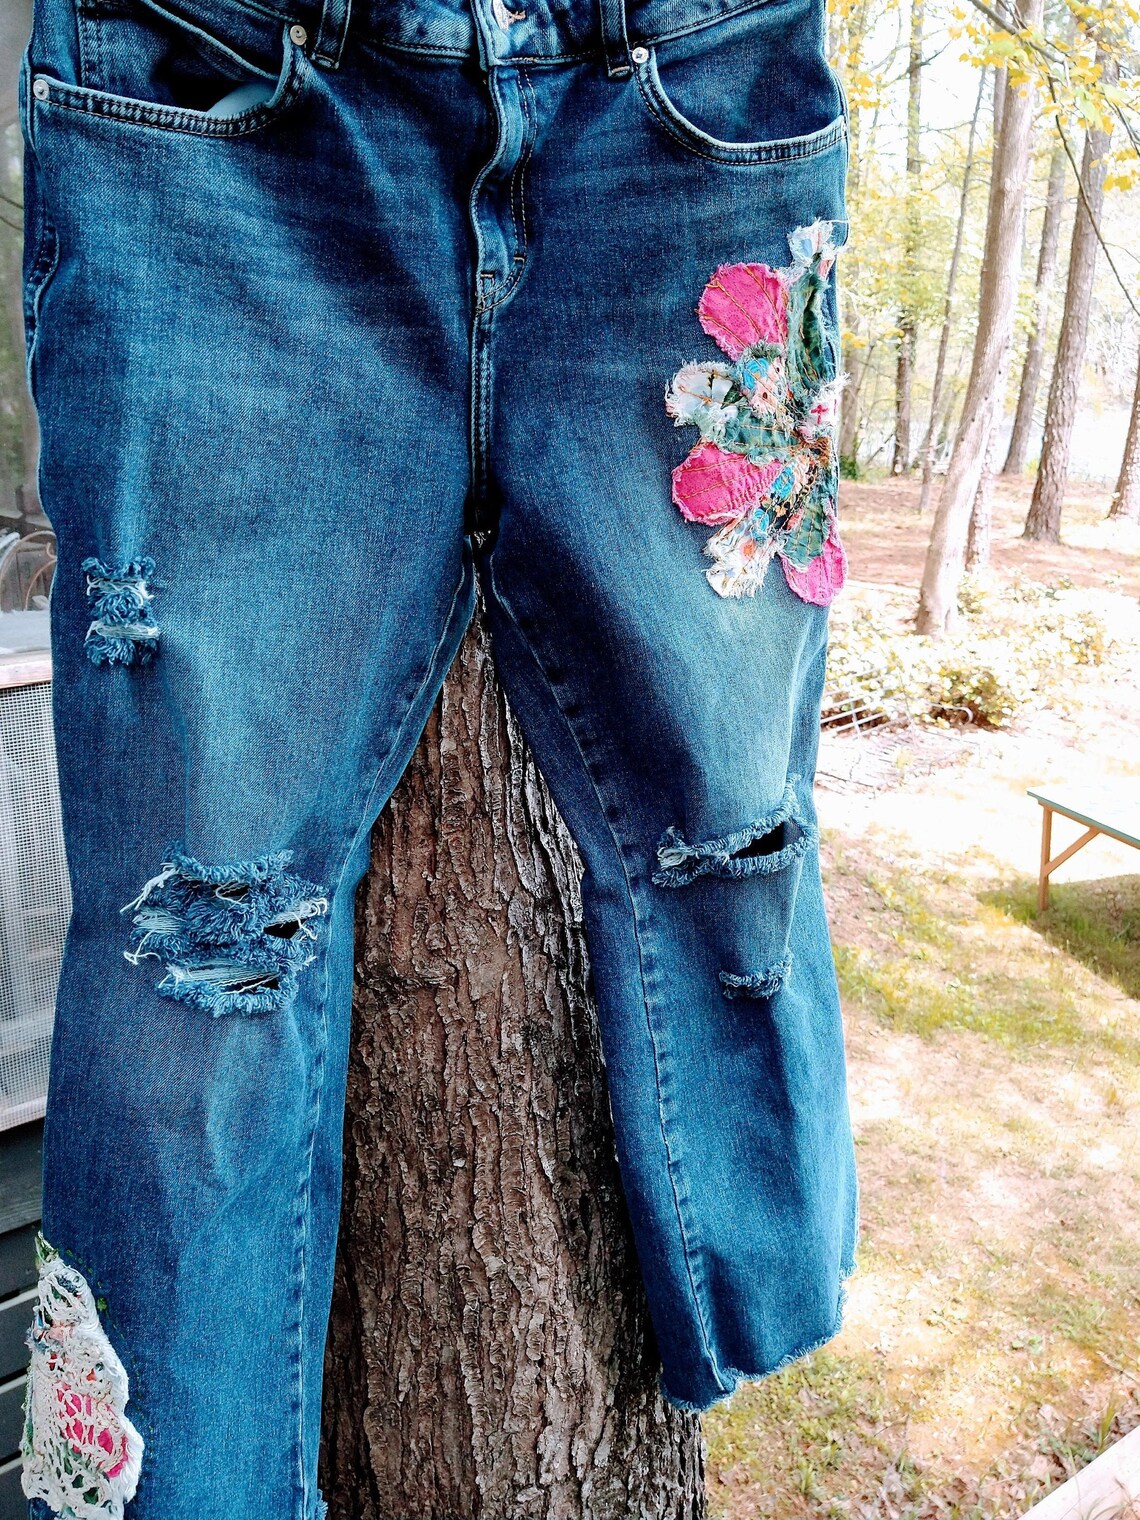 Customized Jeans Patchwork Embroidery Boho Distressed - Etsy